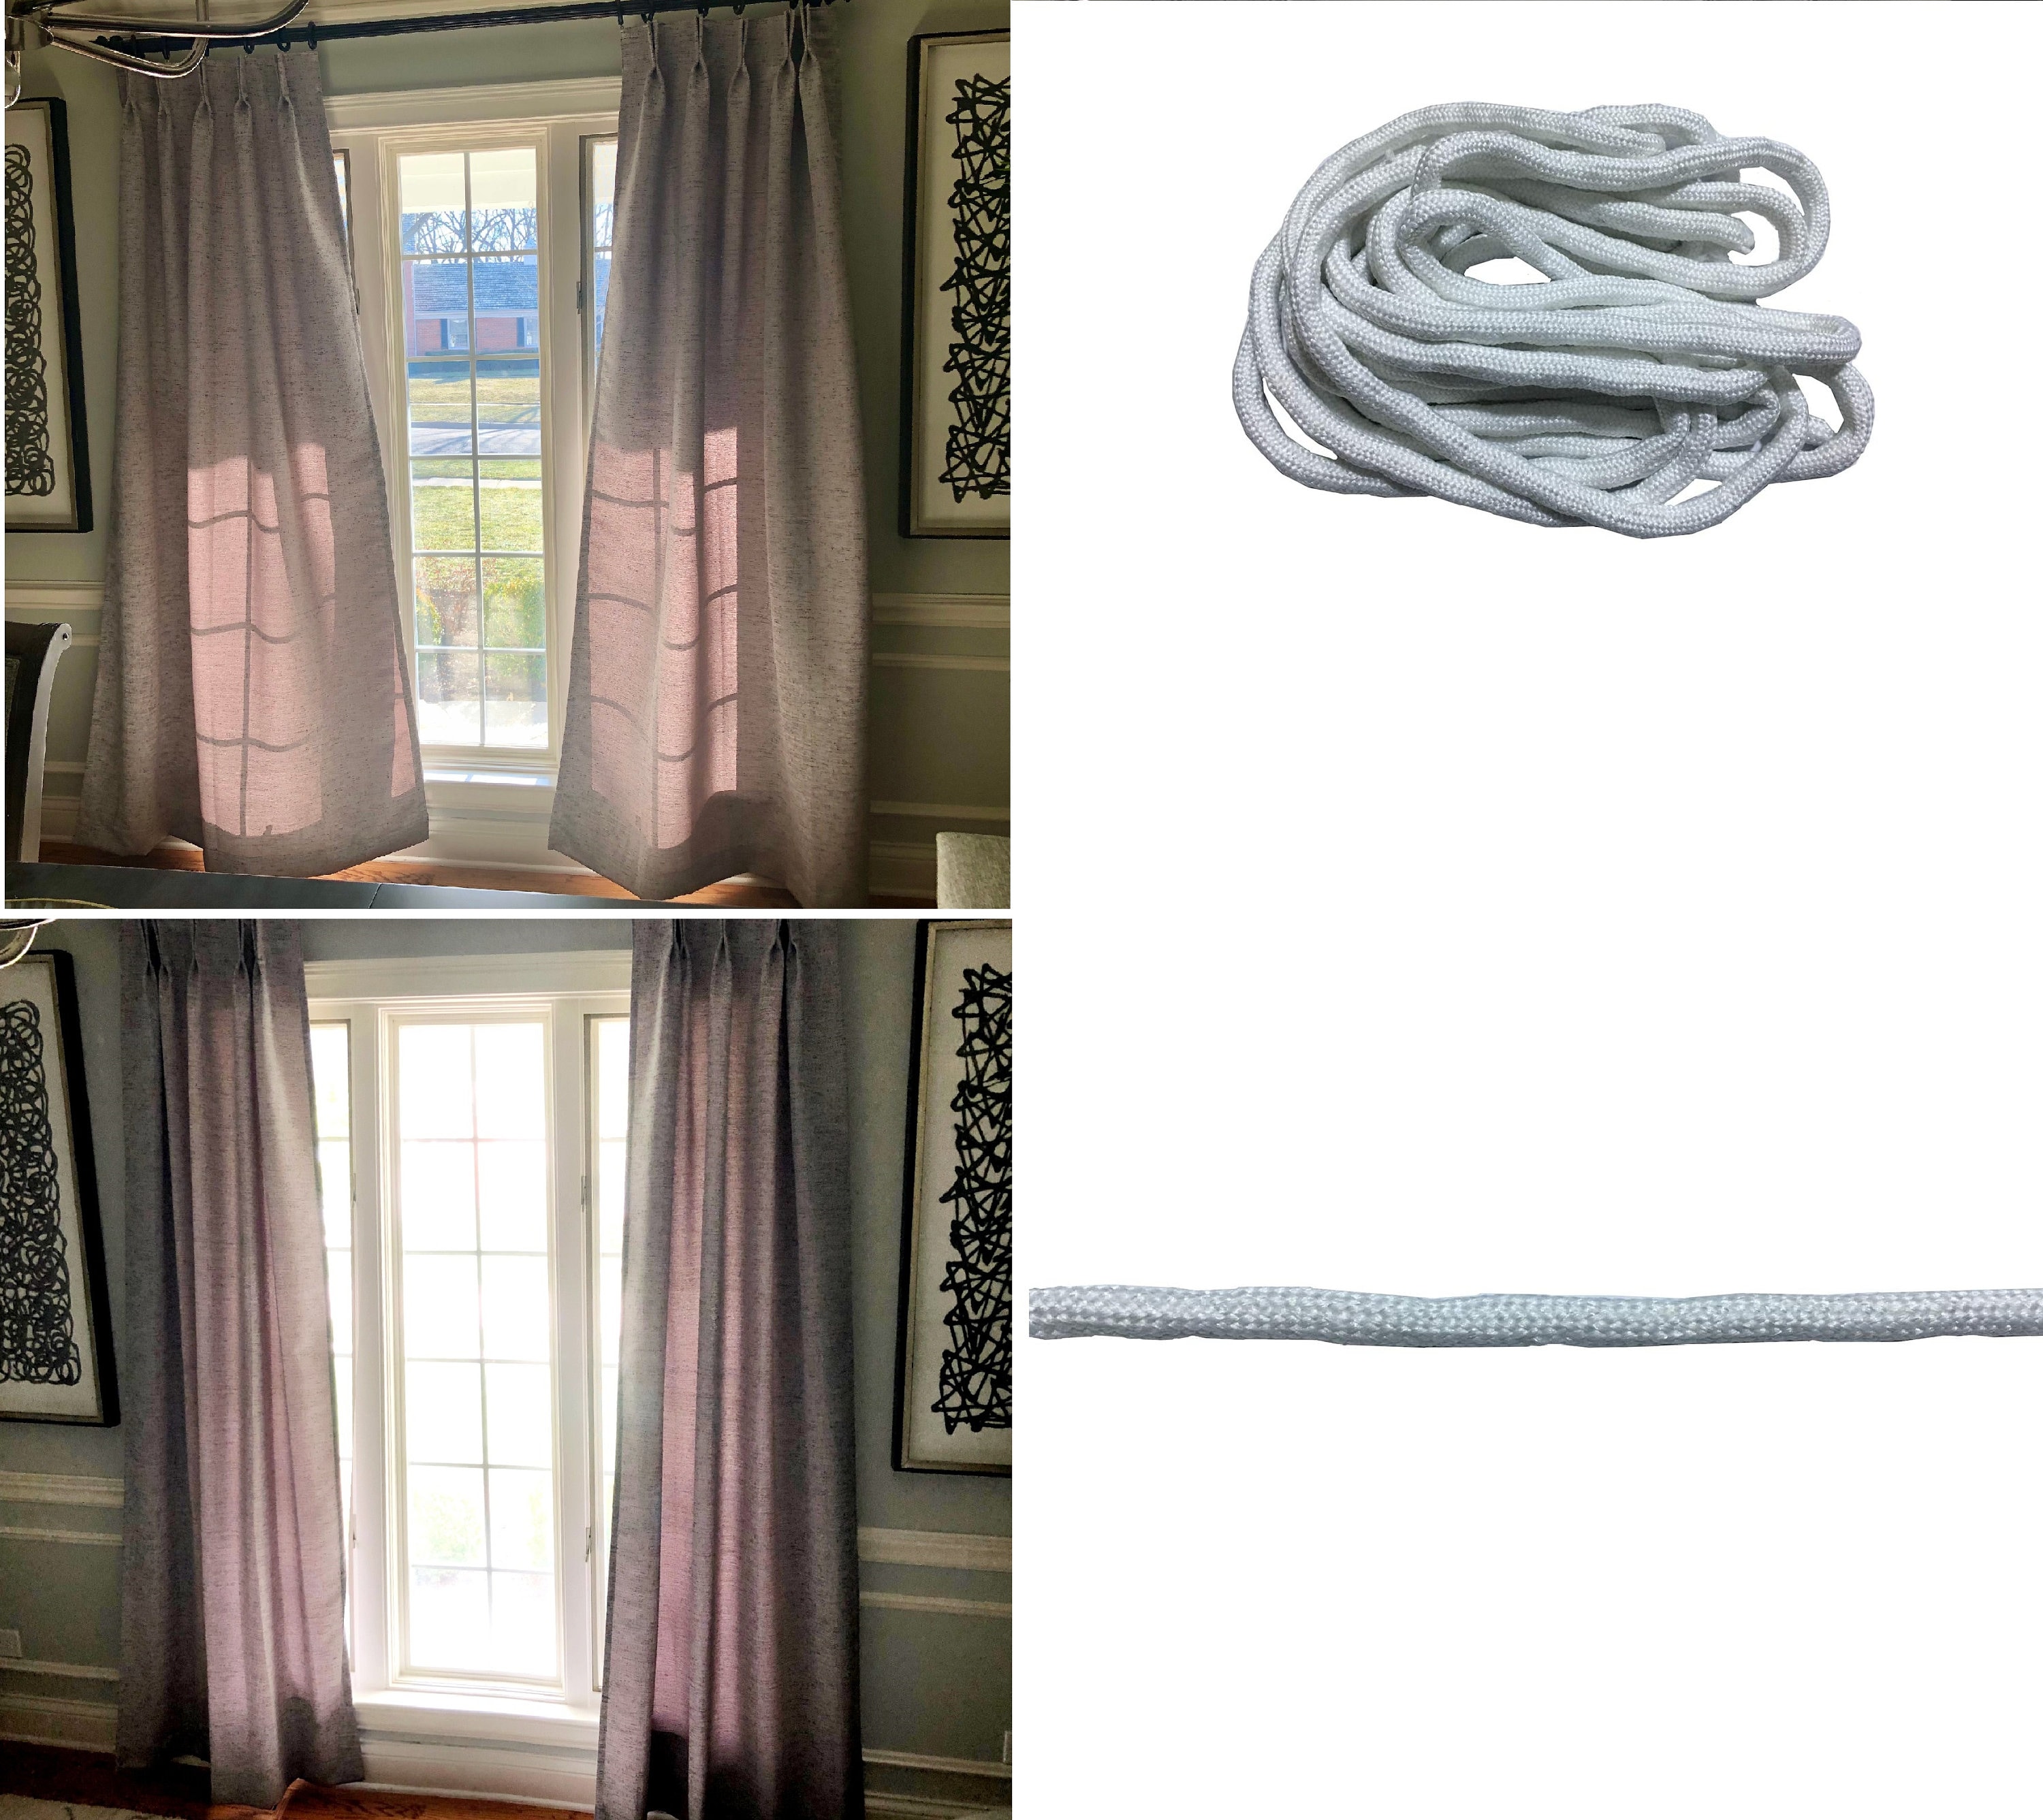 Add Weights to the Bottom of Curtains lead Free Sausage Bead Weight Heavy  Rope for Bottom of the Drapes, for Light Weighted Curtains 